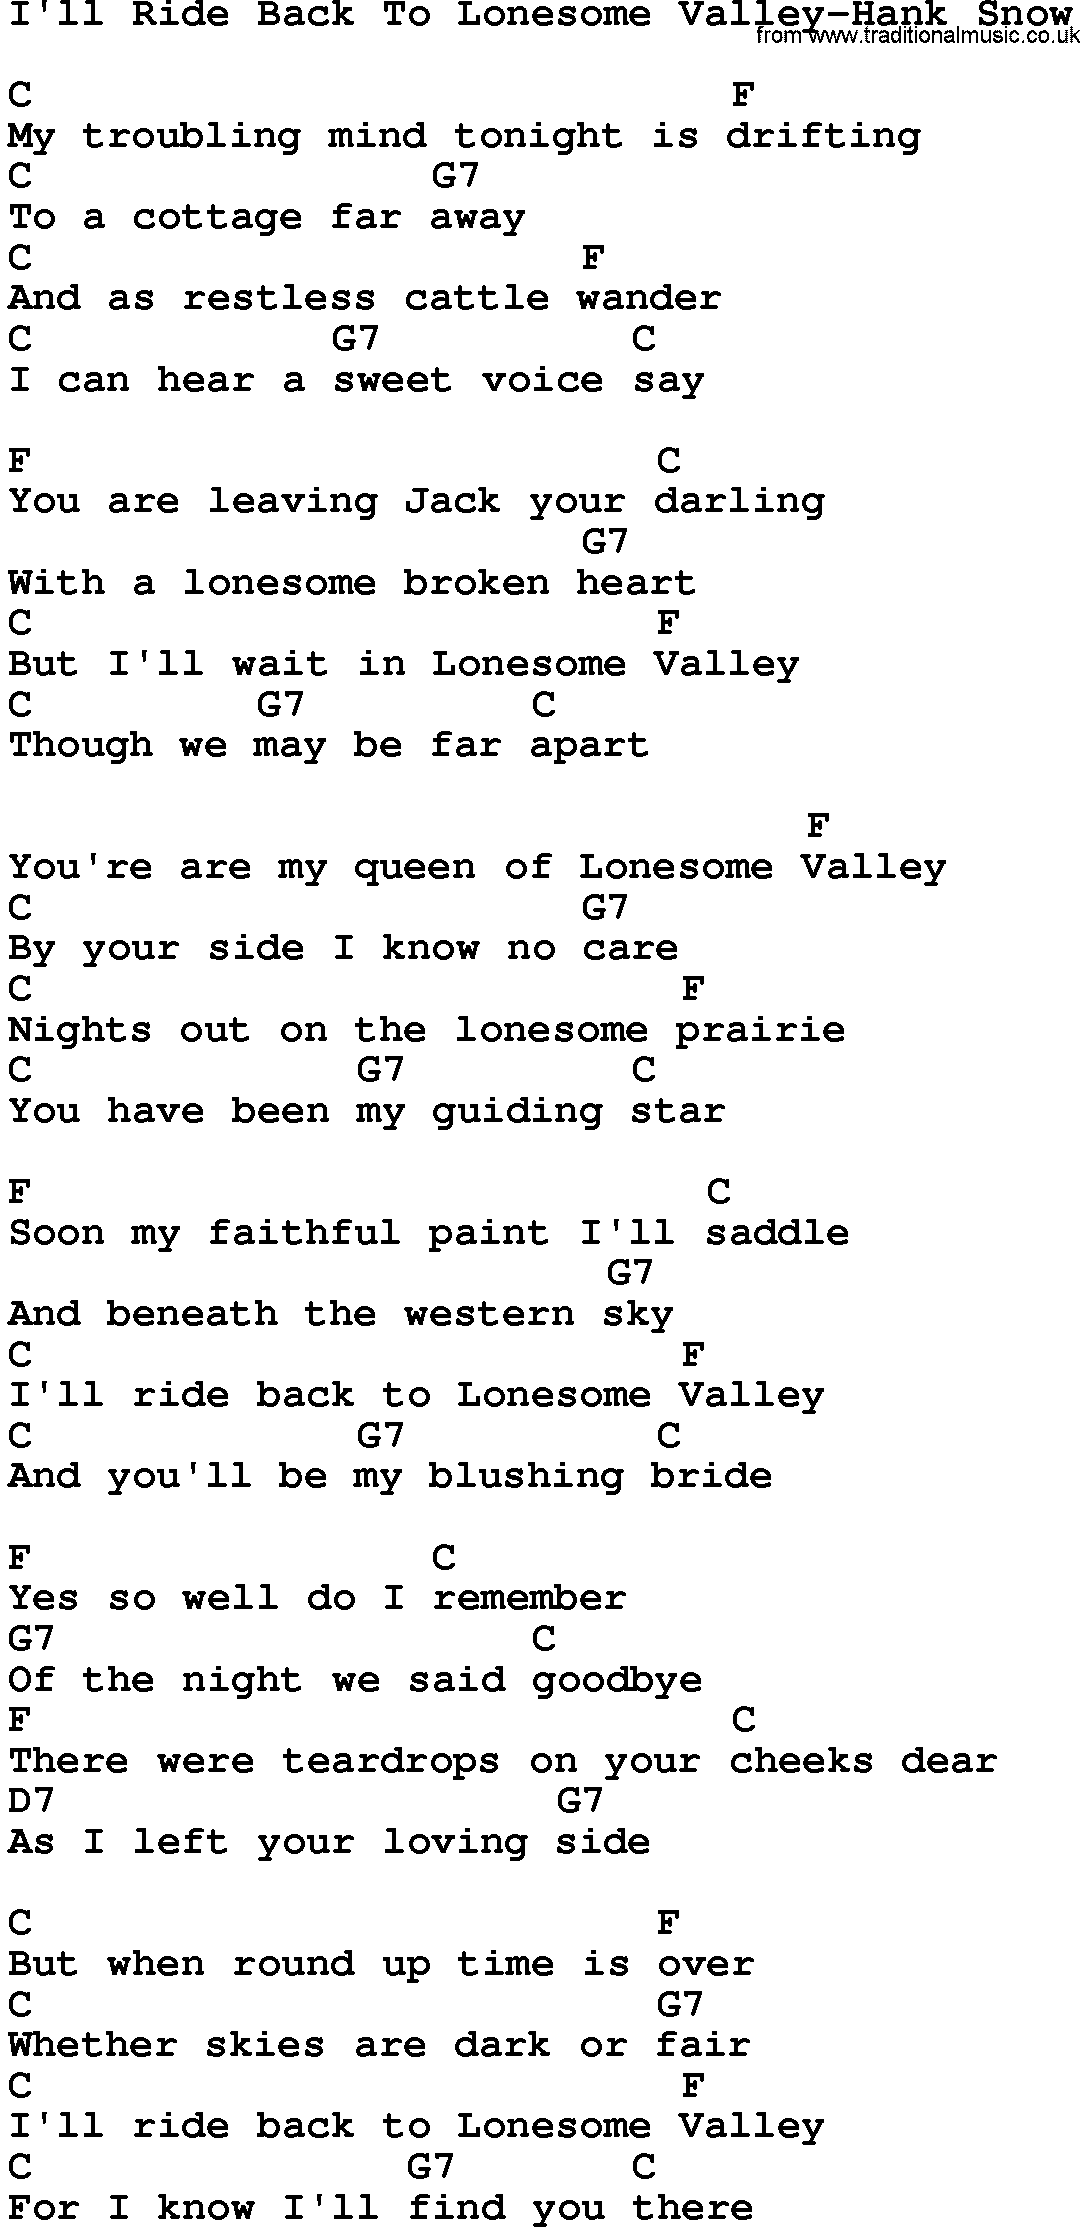 Country music song: I'll Ride Back To Lonesome Valley-Hank Snow lyrics and chords